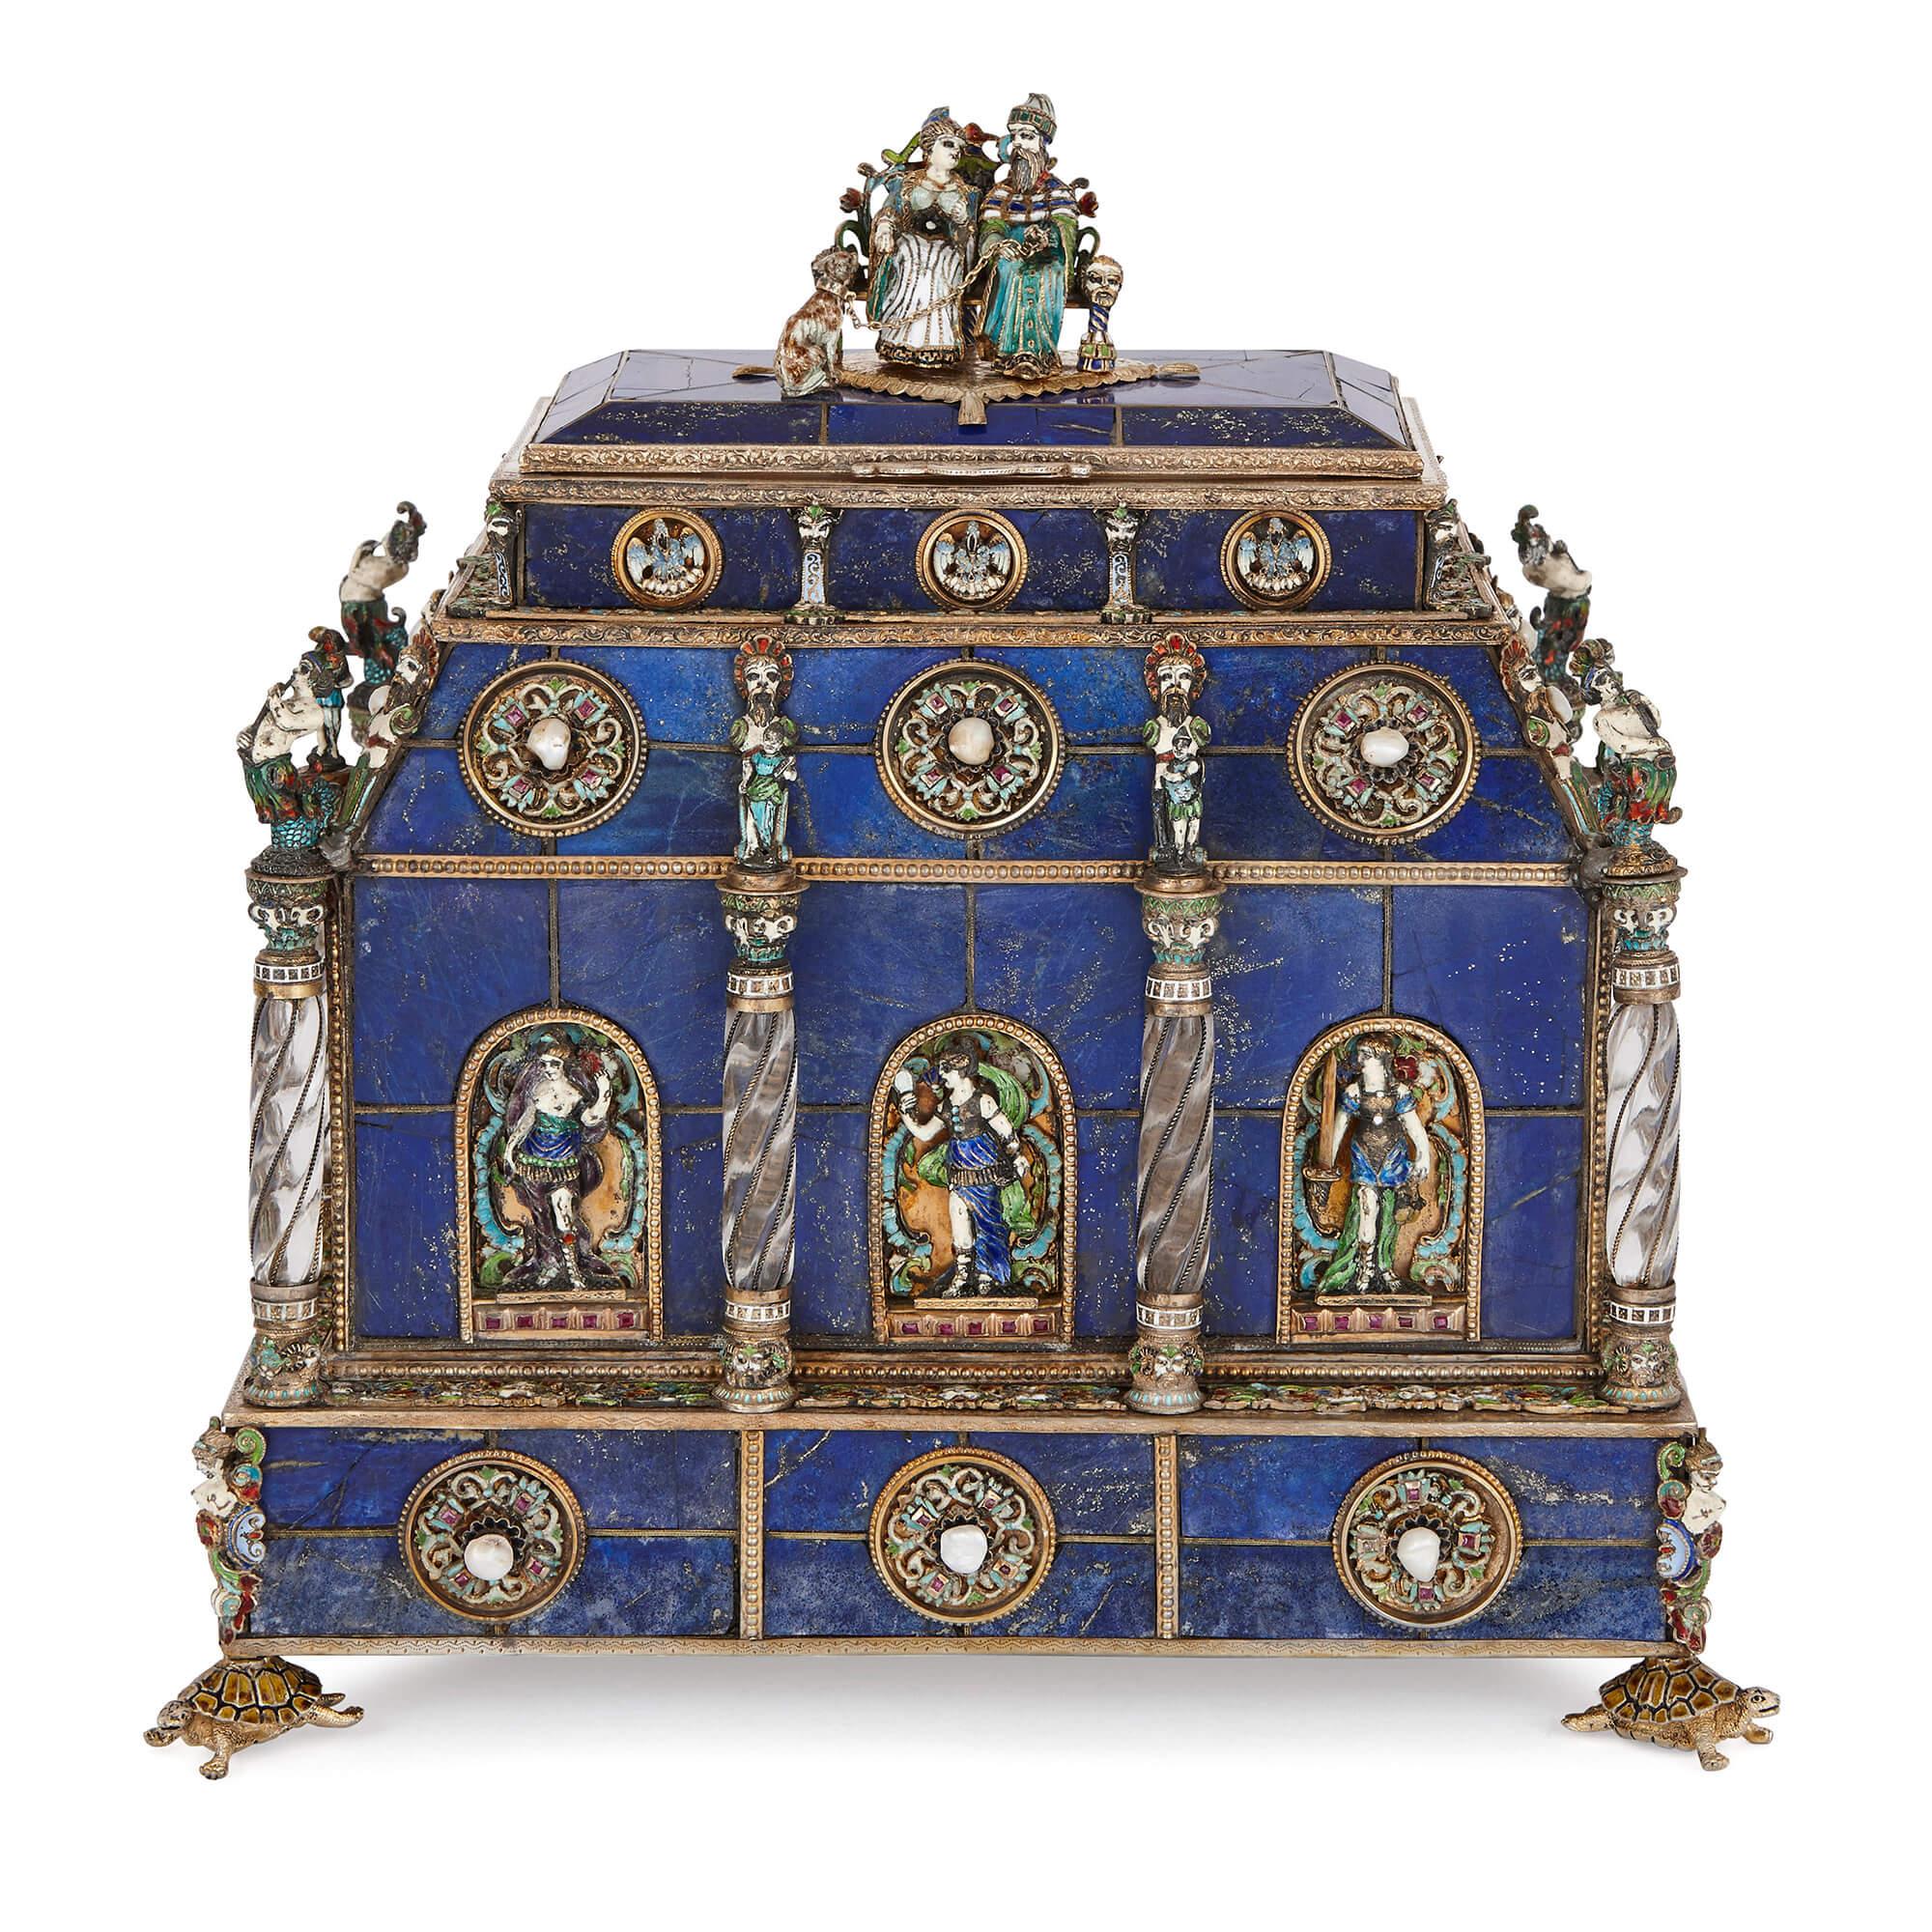 This stunning casket combines opulent materials with careful craftsmanship to produce an outstanding example of late 19th Century Viennese craftsmanship. It is built from blue lapis lazuli, and mounted with enamel, silver, rock crystal, pearls and